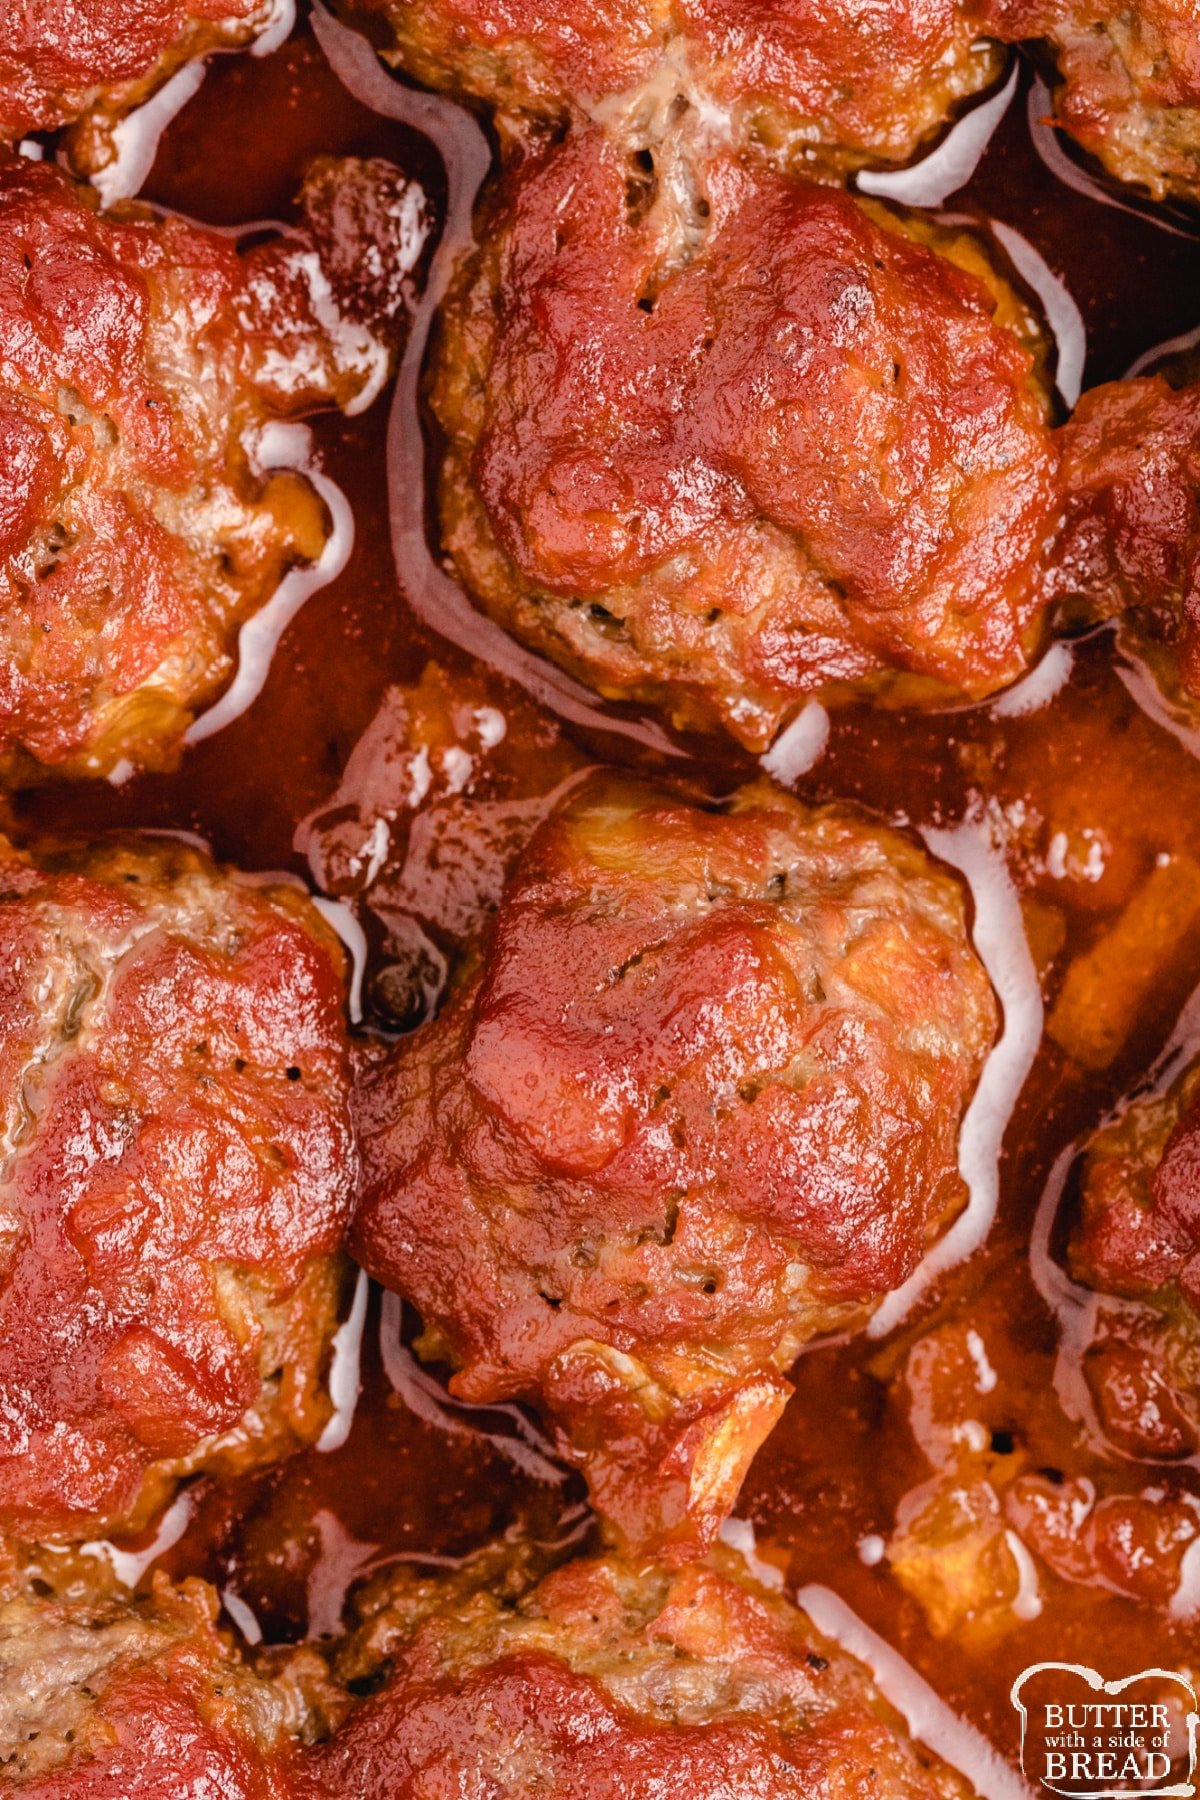 Homemade meatballs made with a homemade barbecue sauce